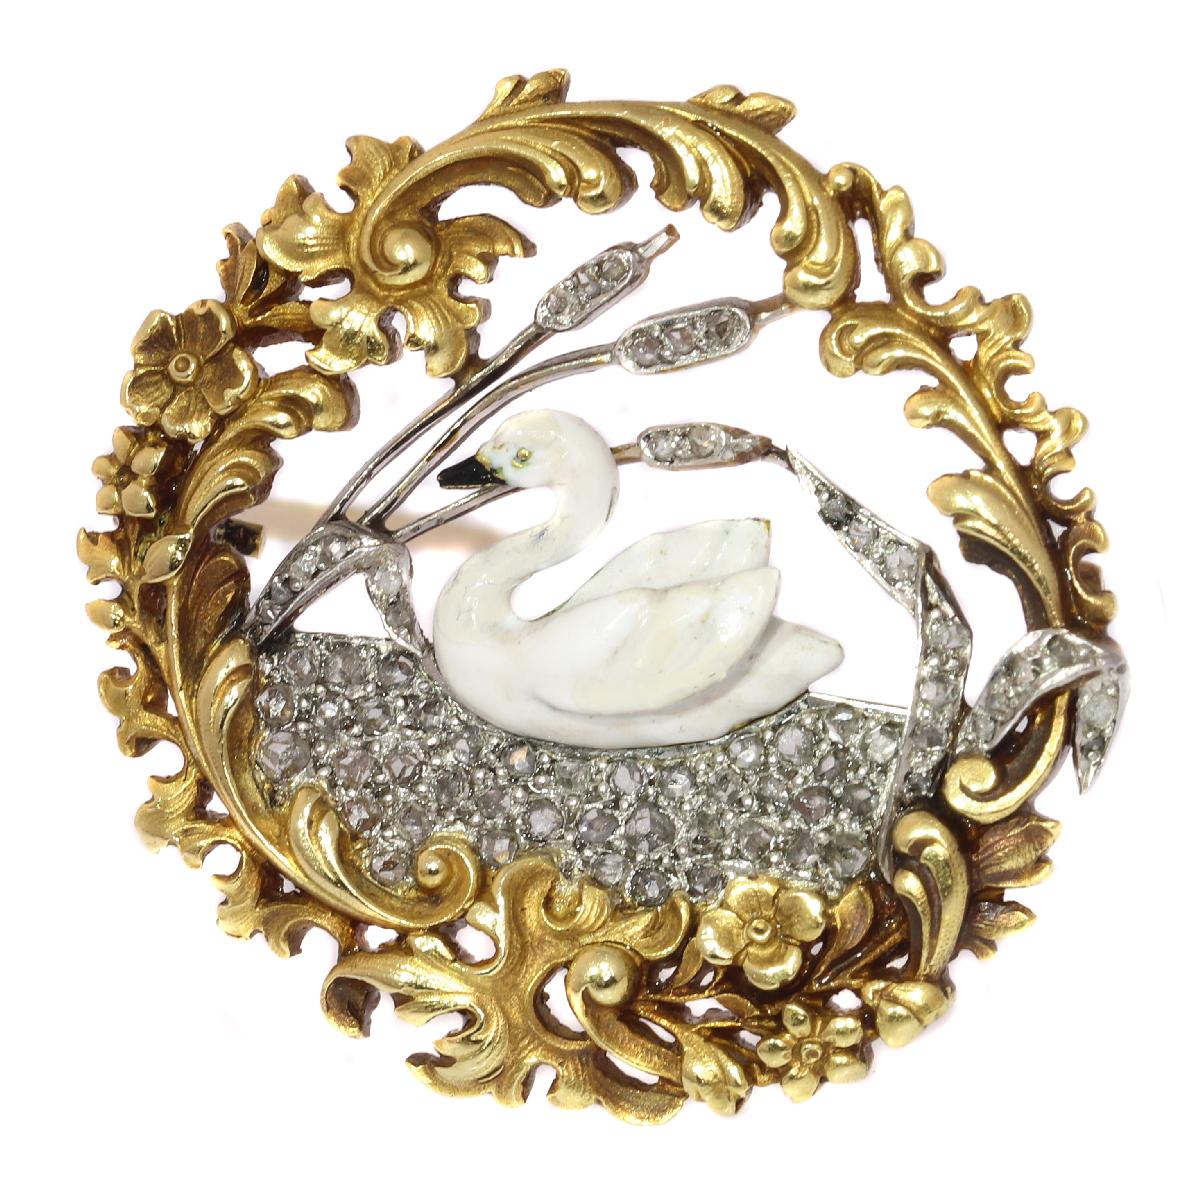 Envision this French Victorian 18K yellow gold brooch with a white enamelled balletic swan resting between the reedmace of a shimmering lake full of silver-encrusted rose cut diamonds as the miniature scenery through the hedge window of your garden.